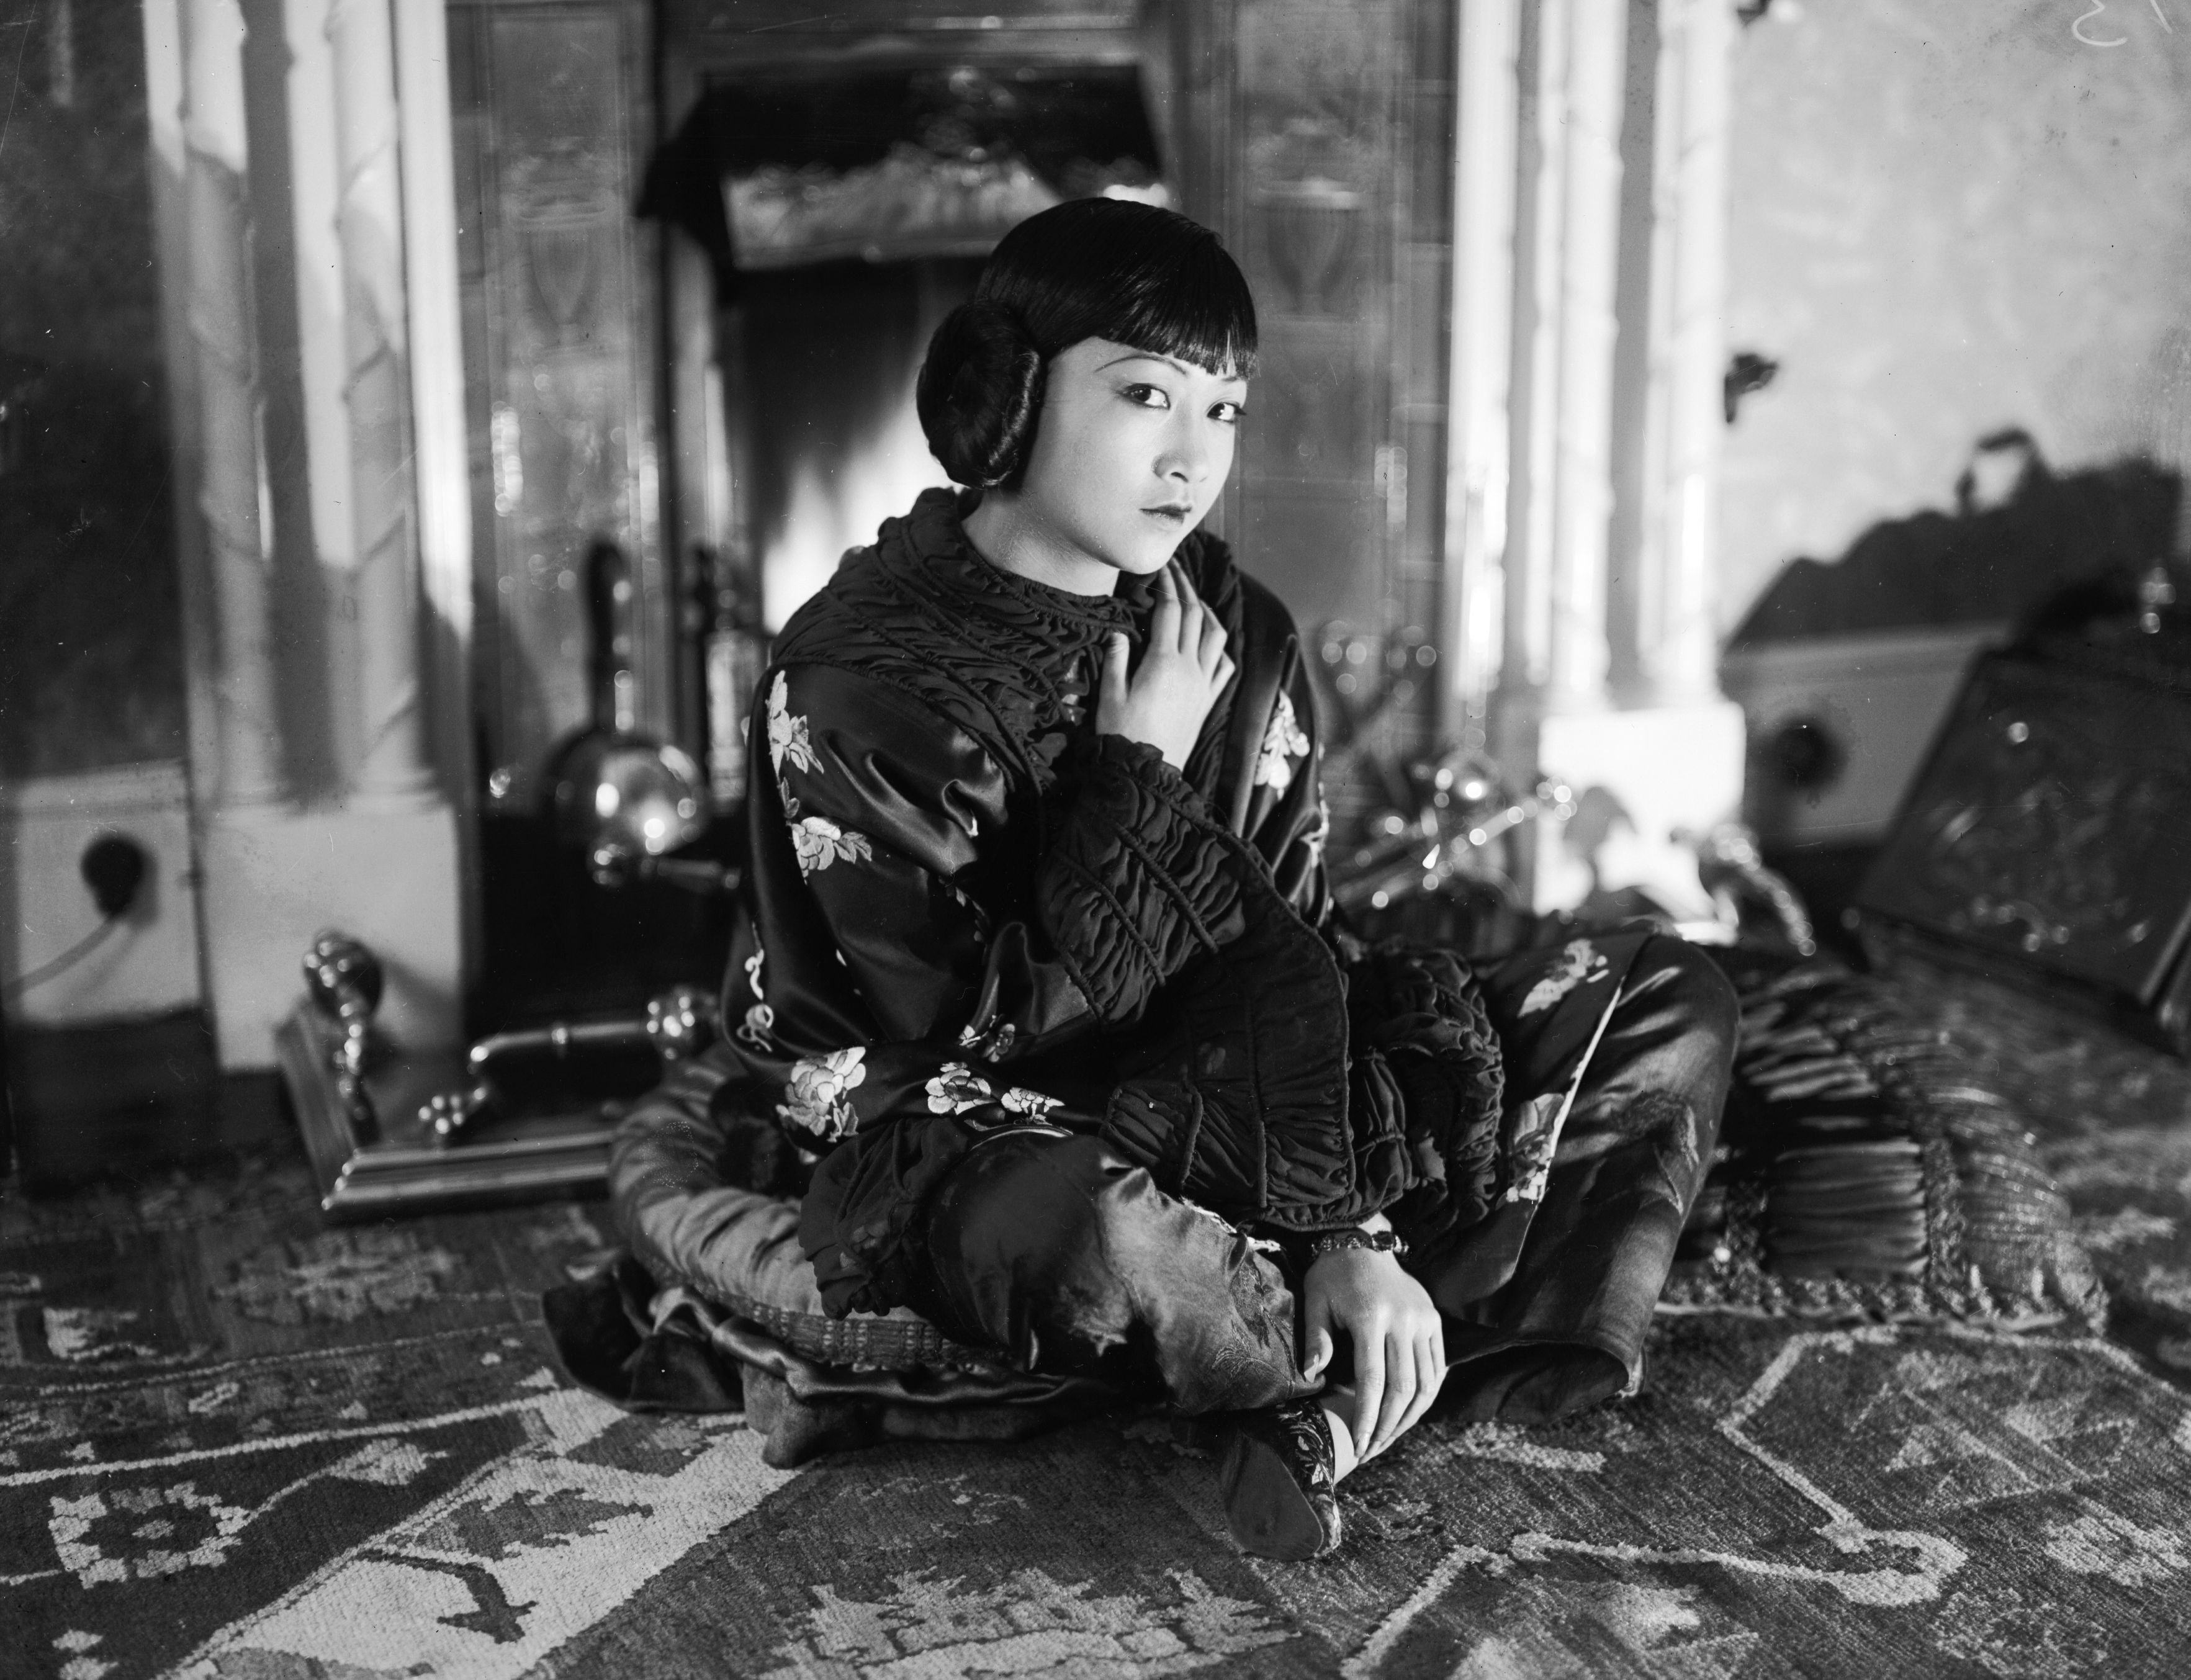 Issue 95 | who is anna may wong, and why does she matter?